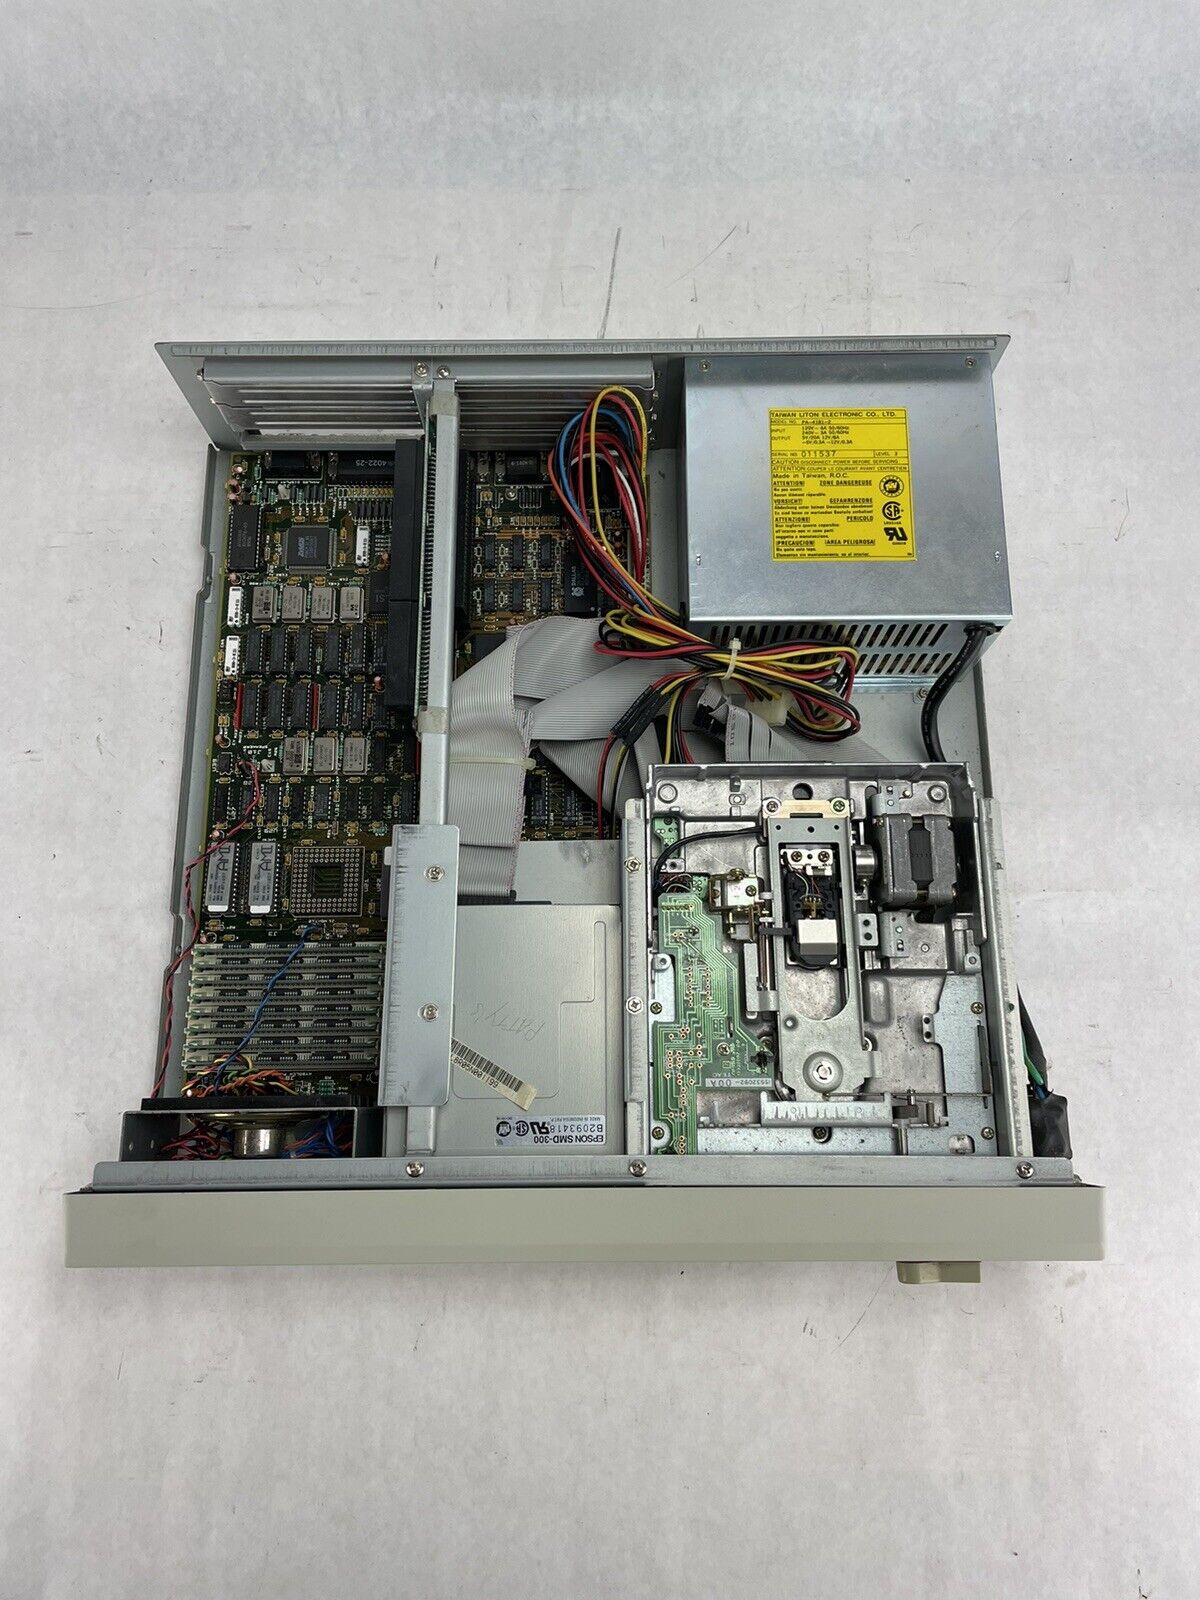 PCSITIVE MB-303 DT Intel 80386DX 20MHz 2MB RAM No HDD No OS